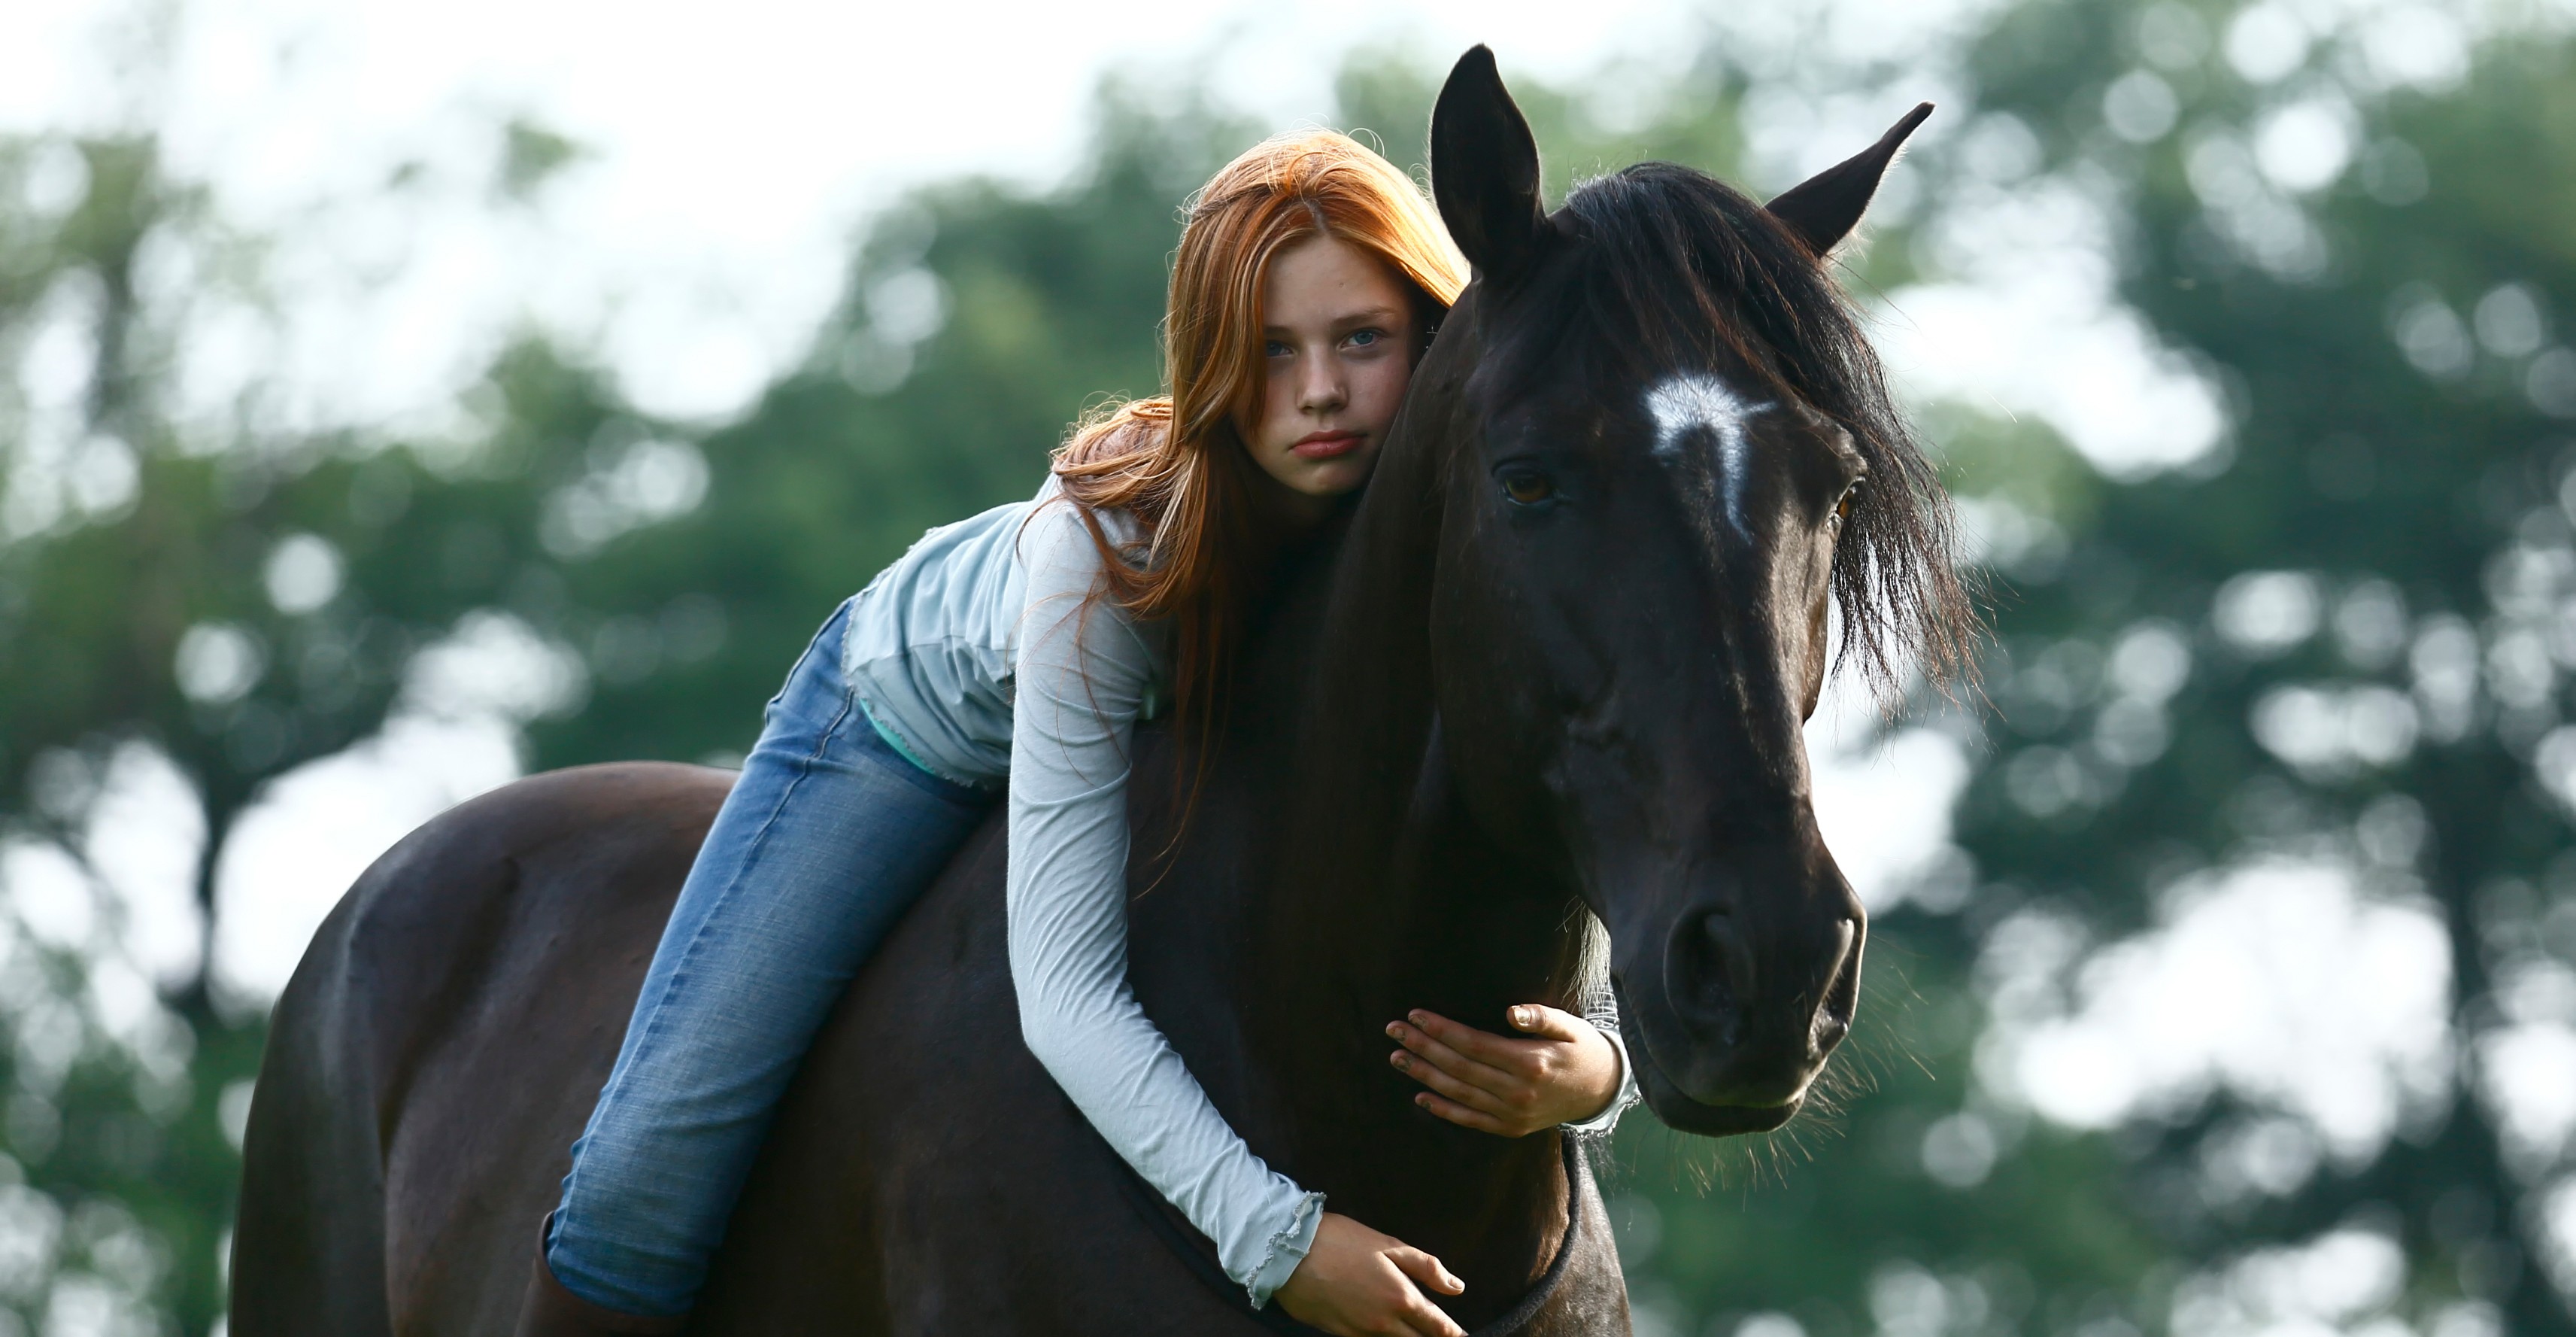 People 3425x1777 women model long hair redhead women outdoors nature animals horse horse riding trees blue eyes jeans looking at viewer hugging women with horse mammals